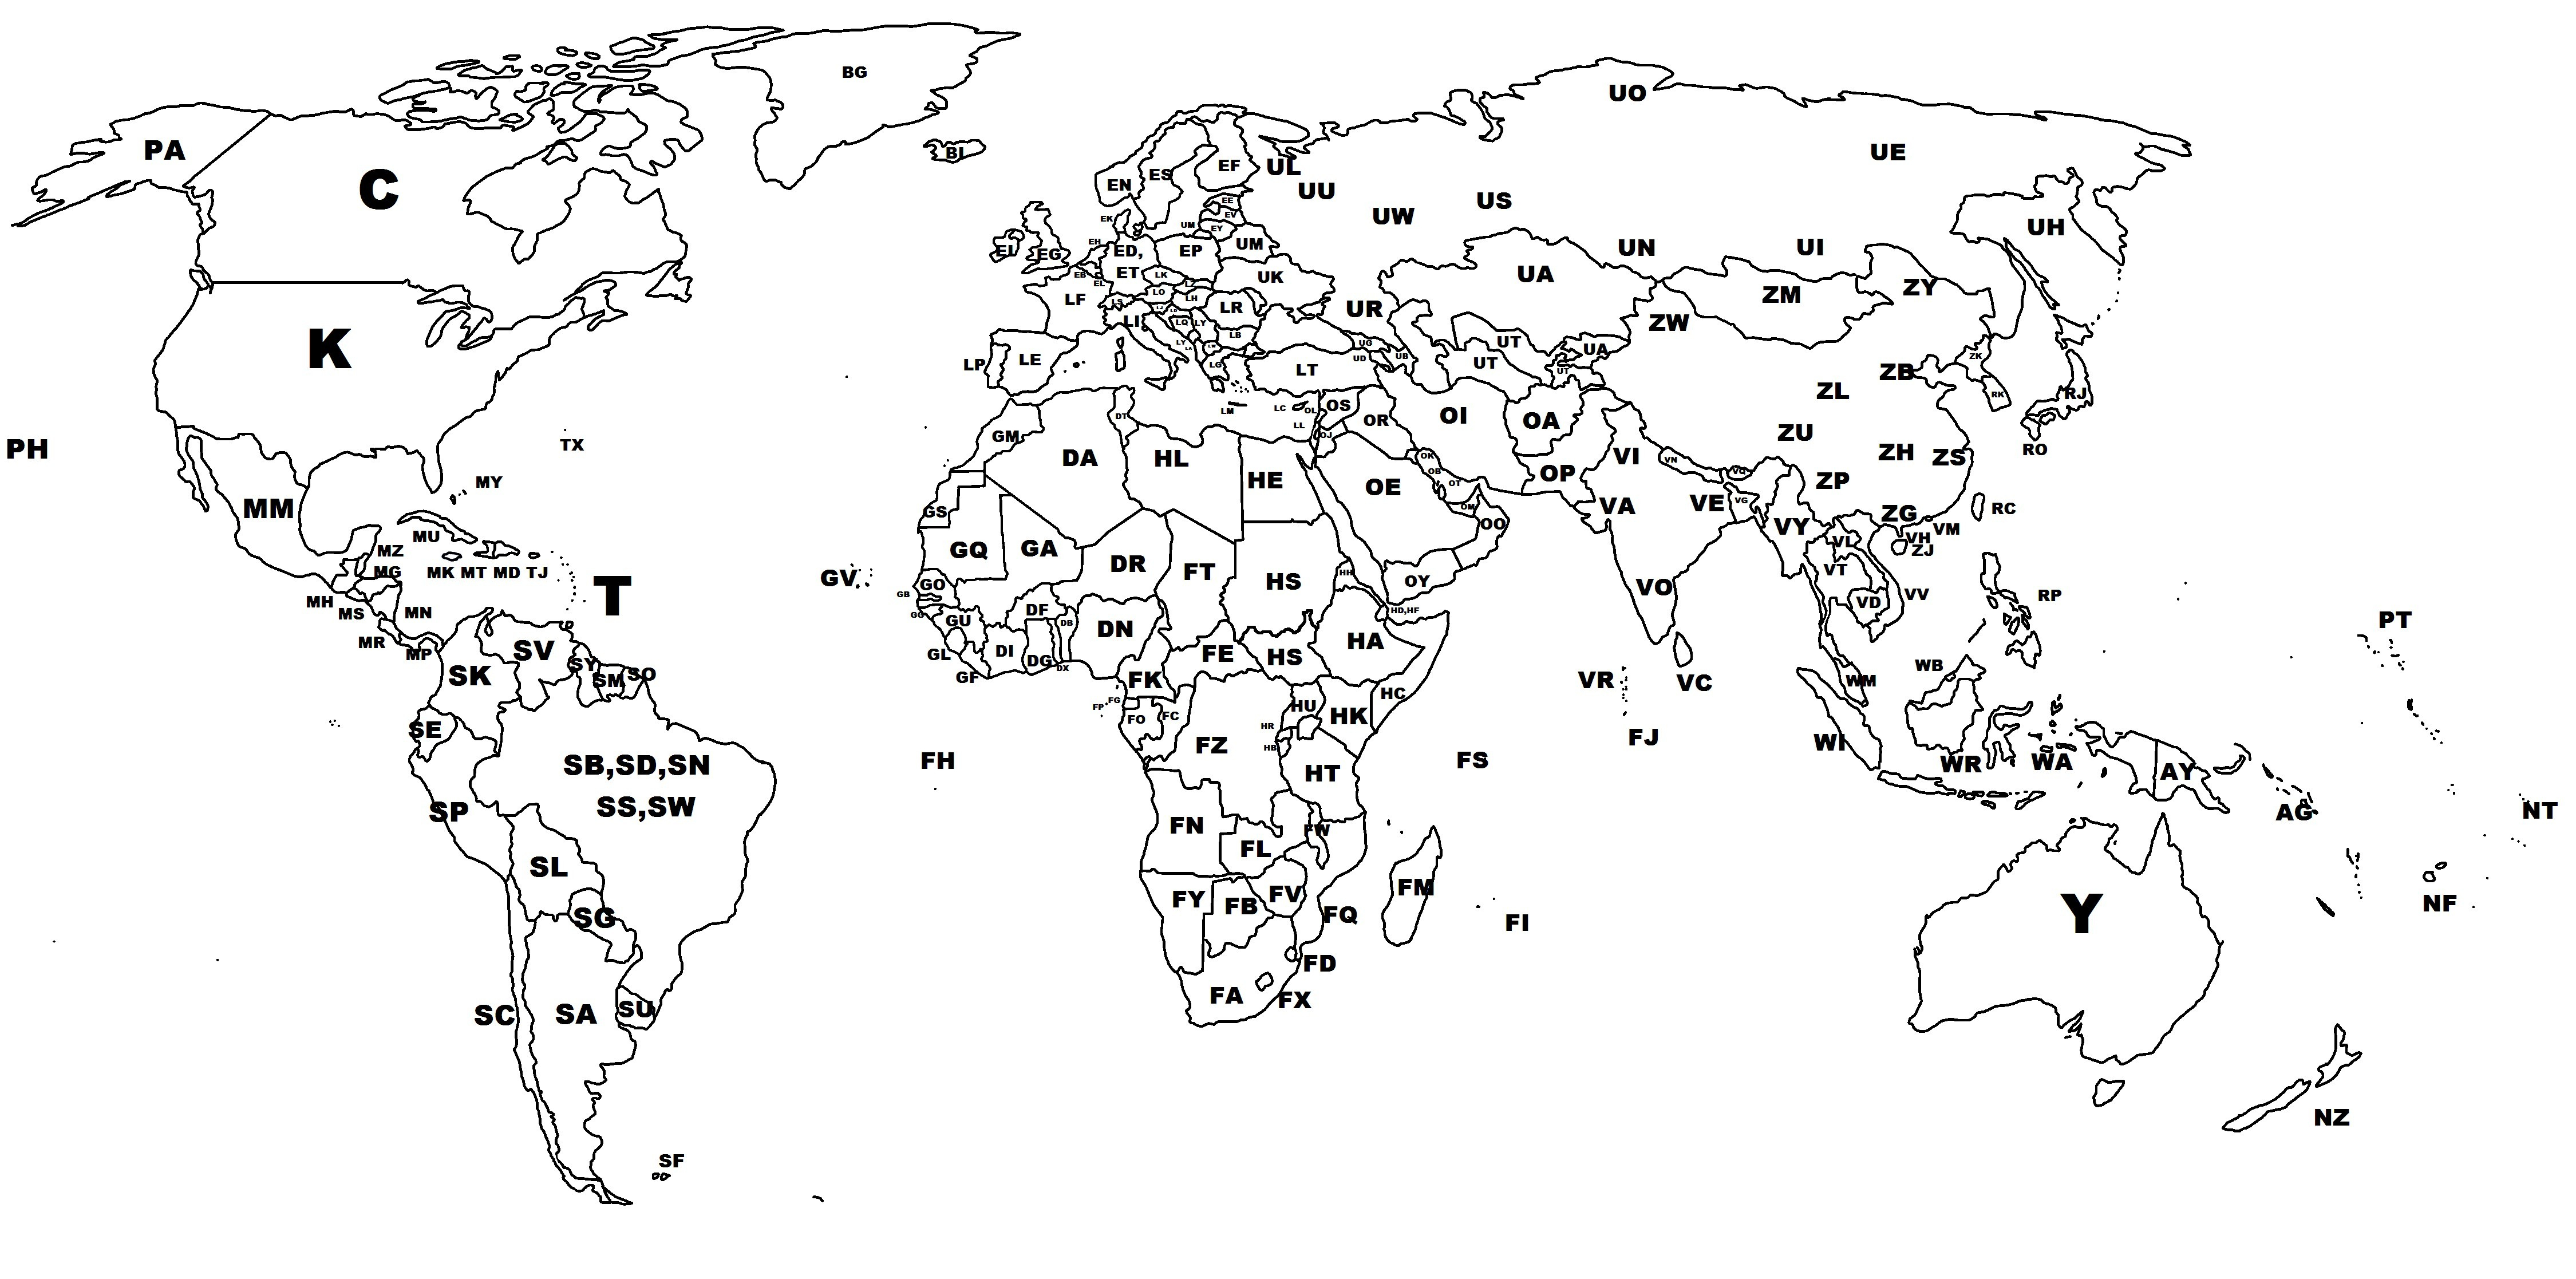 Printable Labeled World Maps - Lgq - Printable World Map With Countries Labeled